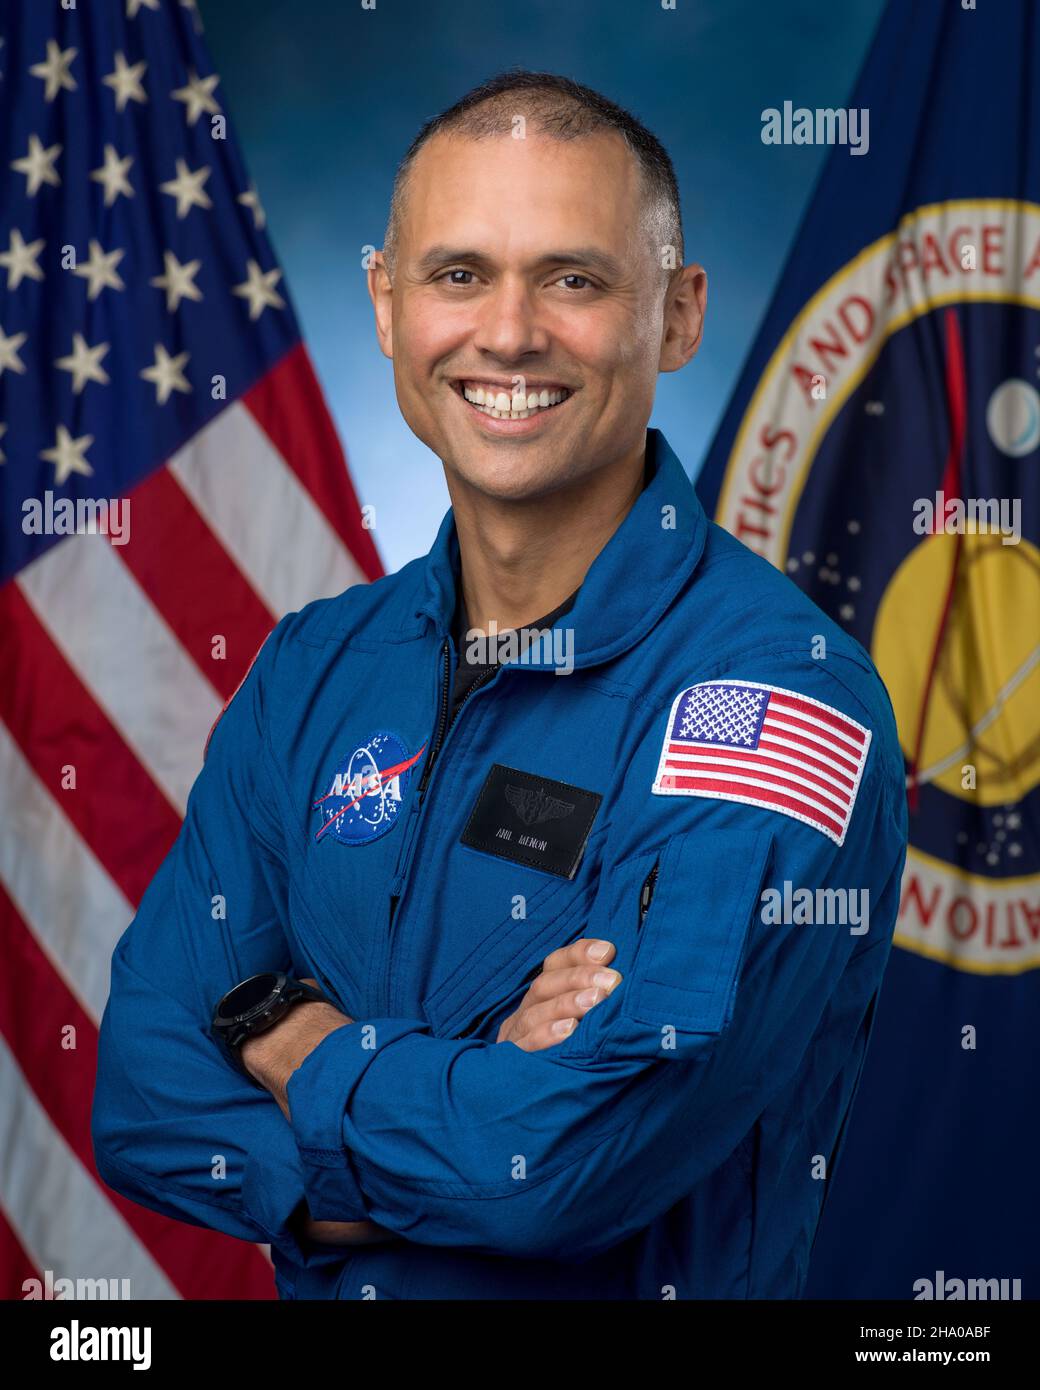 Houston, United States. 03 December, 2021. NASA astronaut candidate Anil Menon, poses for his official portrait at the Johnson Space Center, December 3, 2021 in Houston, Texas. Menon is one of ten new astronaut candidates chosen by NASA.  Credit: Robert Markowitz/NASA/Alamy Live News Stock Photo